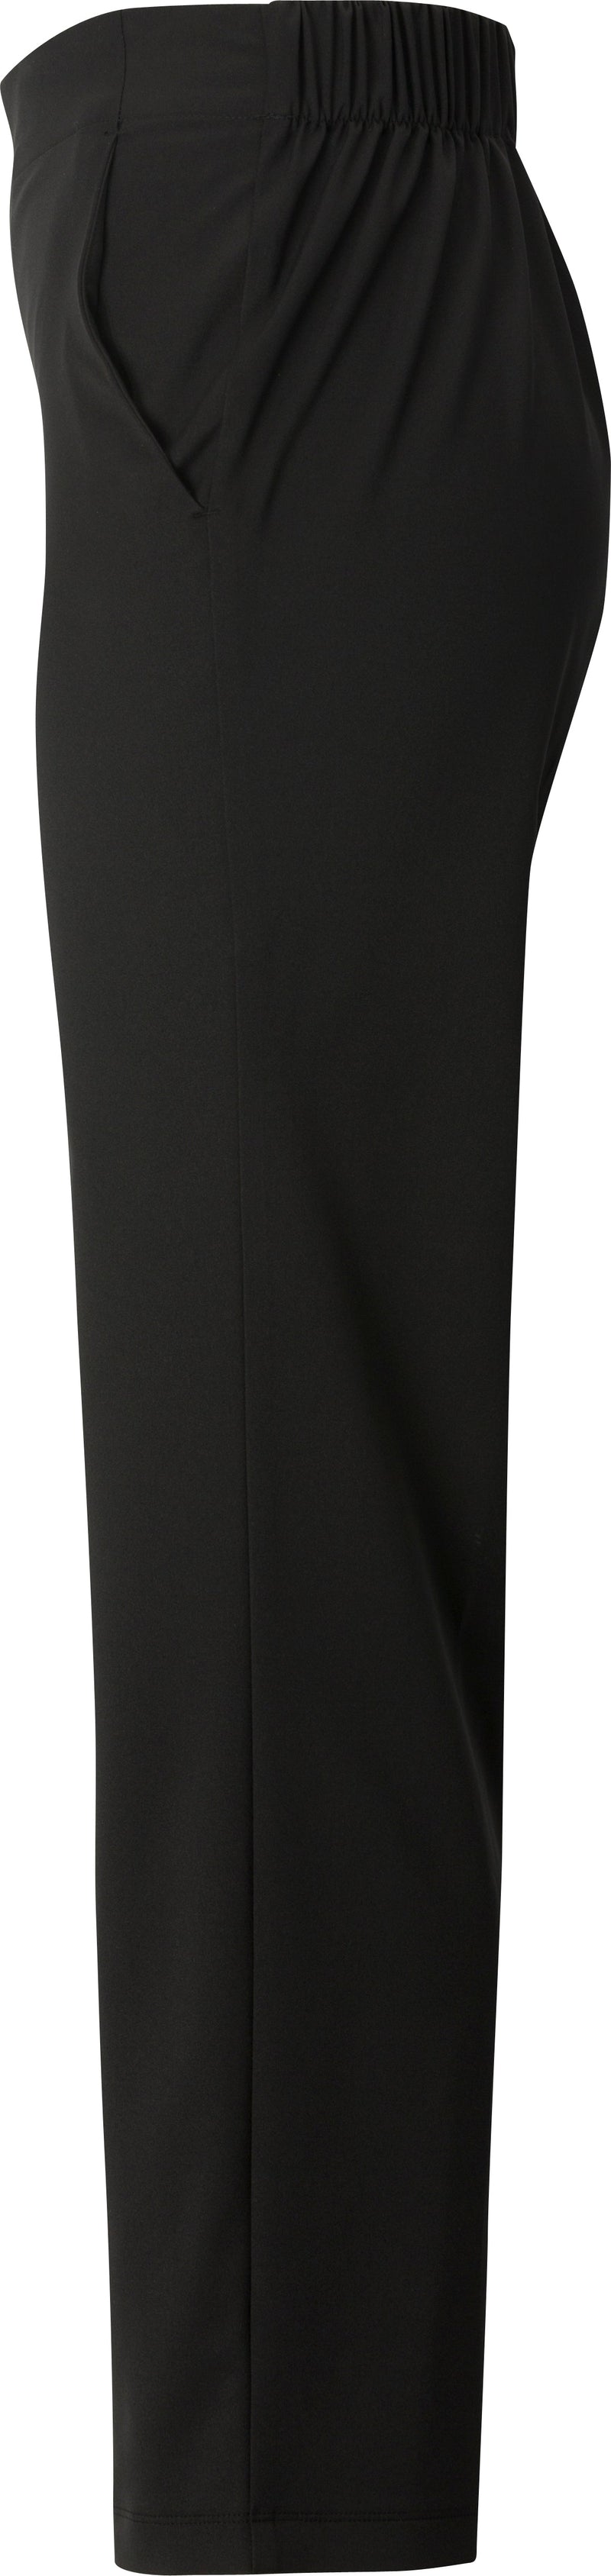 [8861] Sorrento Power Stretch Straight Leg Pant. Live Chat For Bulk Discounts.